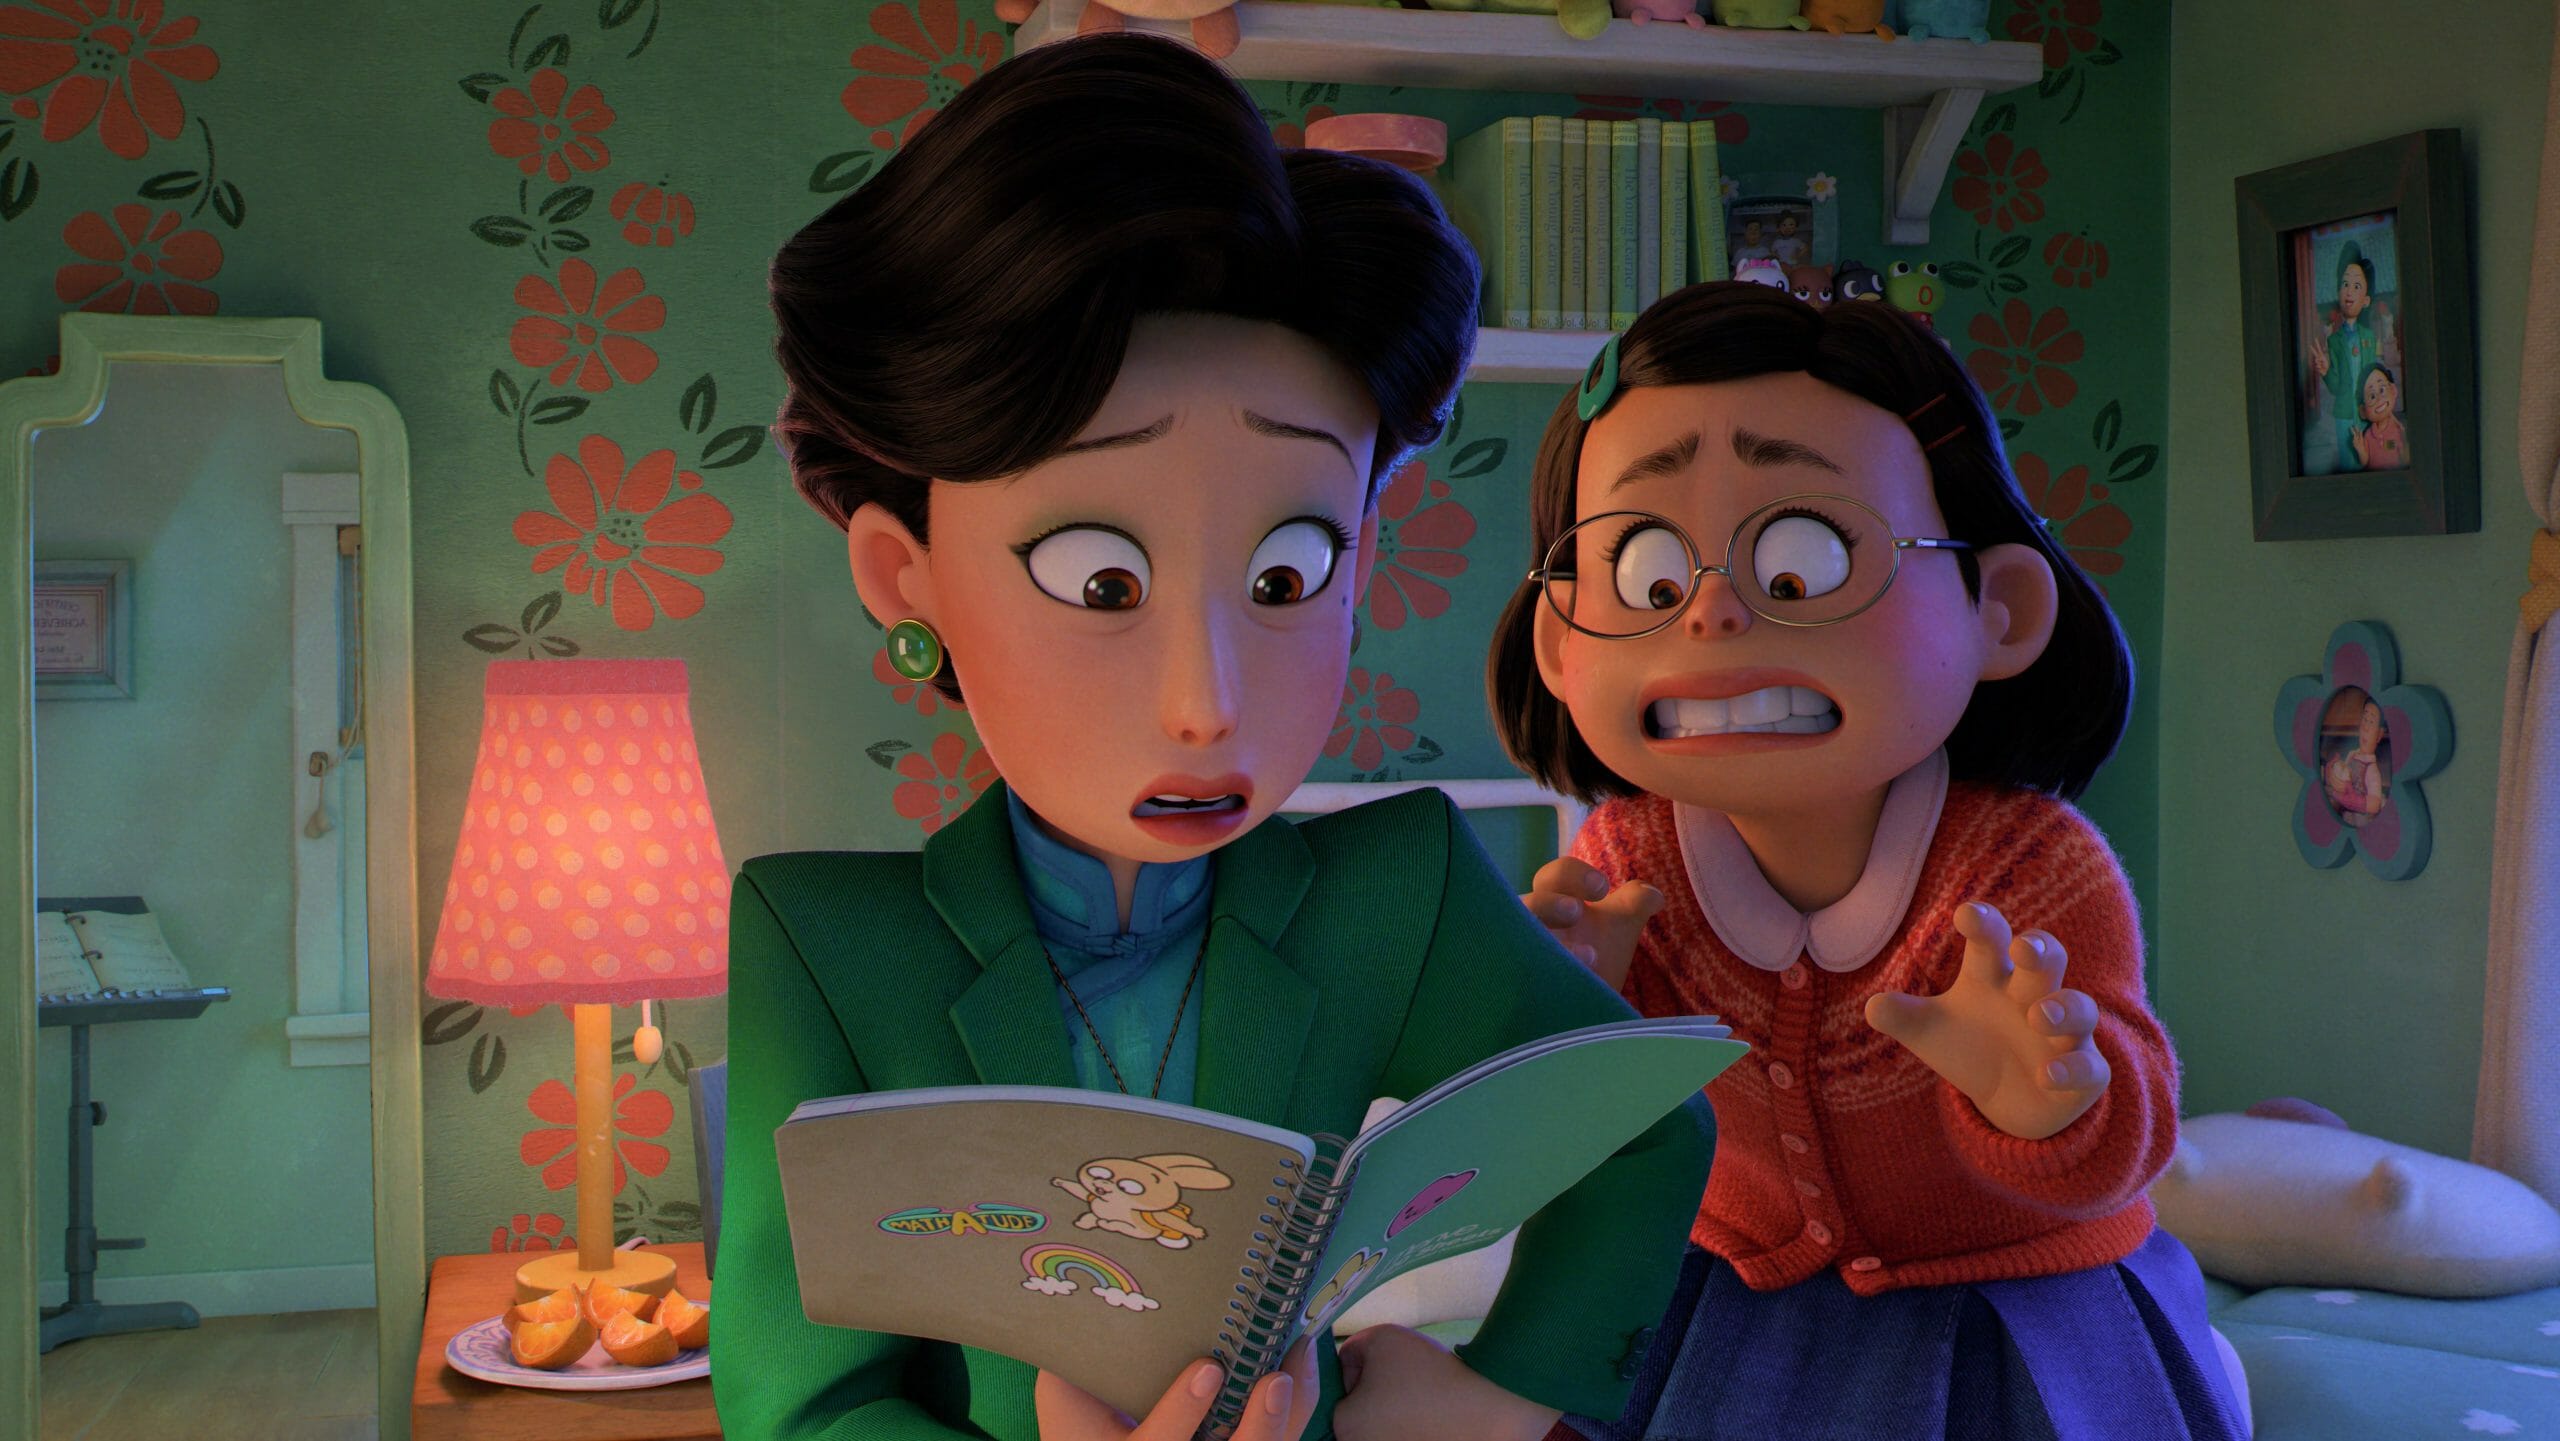 Mie Lee looks in distress as her mother Ming looks over her personal notebooks and diary as seen in the new Pixar film TURNING RED streaming on Disney+.